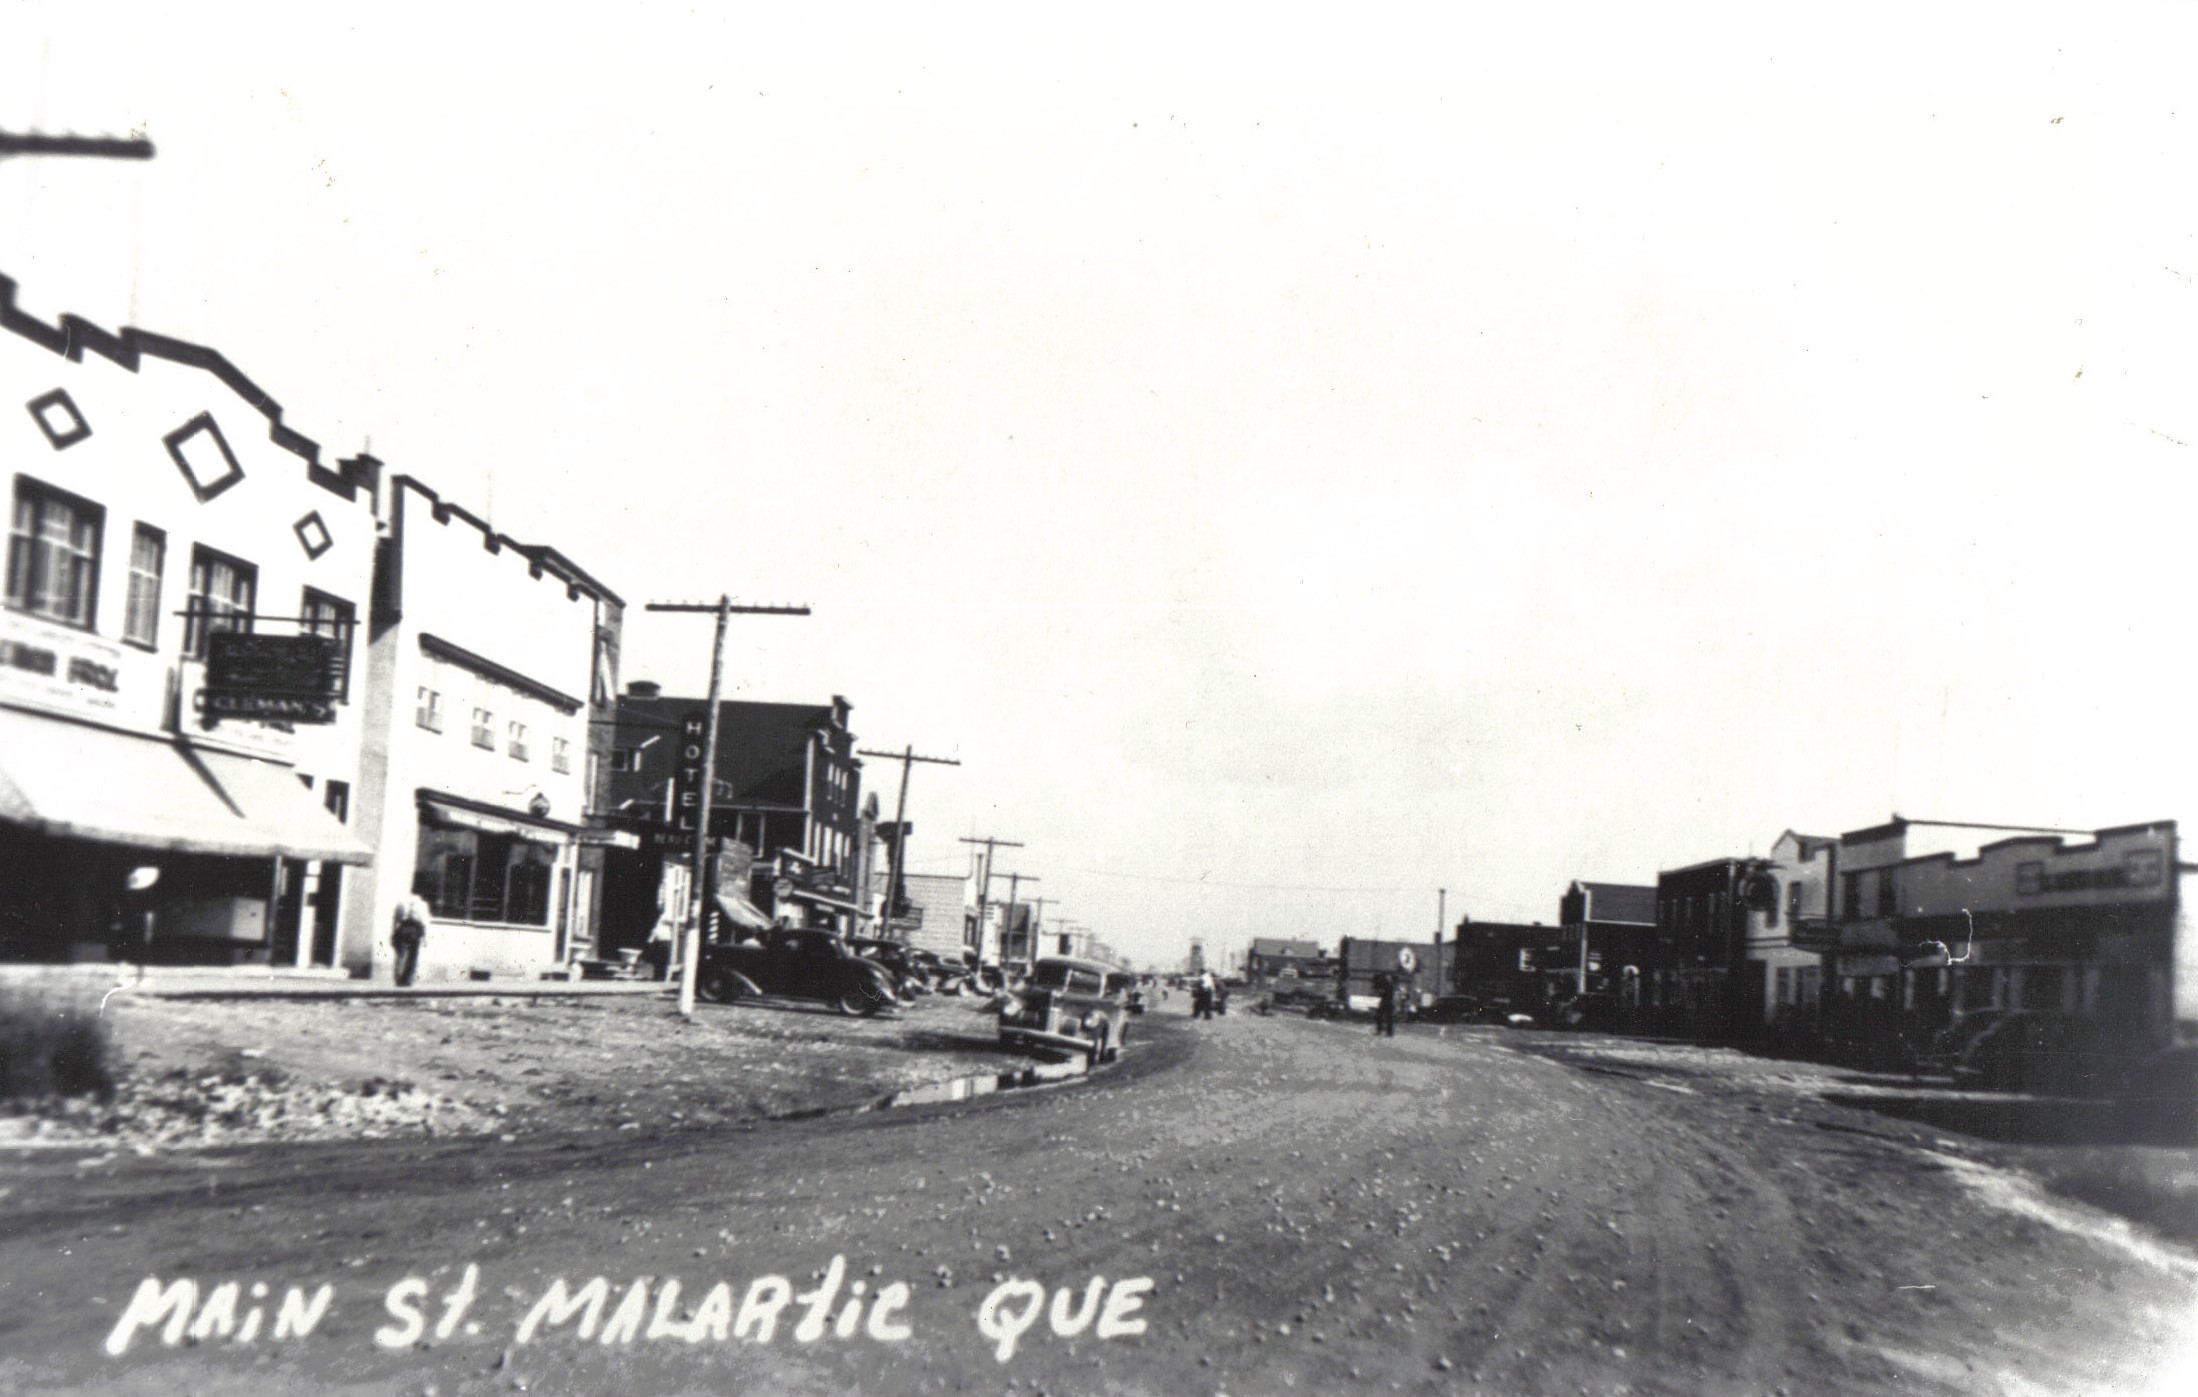 Black and white photograph of a wide gravel road lined with good-quality buildings. On the left, the sign for Cleman’s store and a hotel. Several cars are parked on either side. In the background, the headframe of a mine shaft.